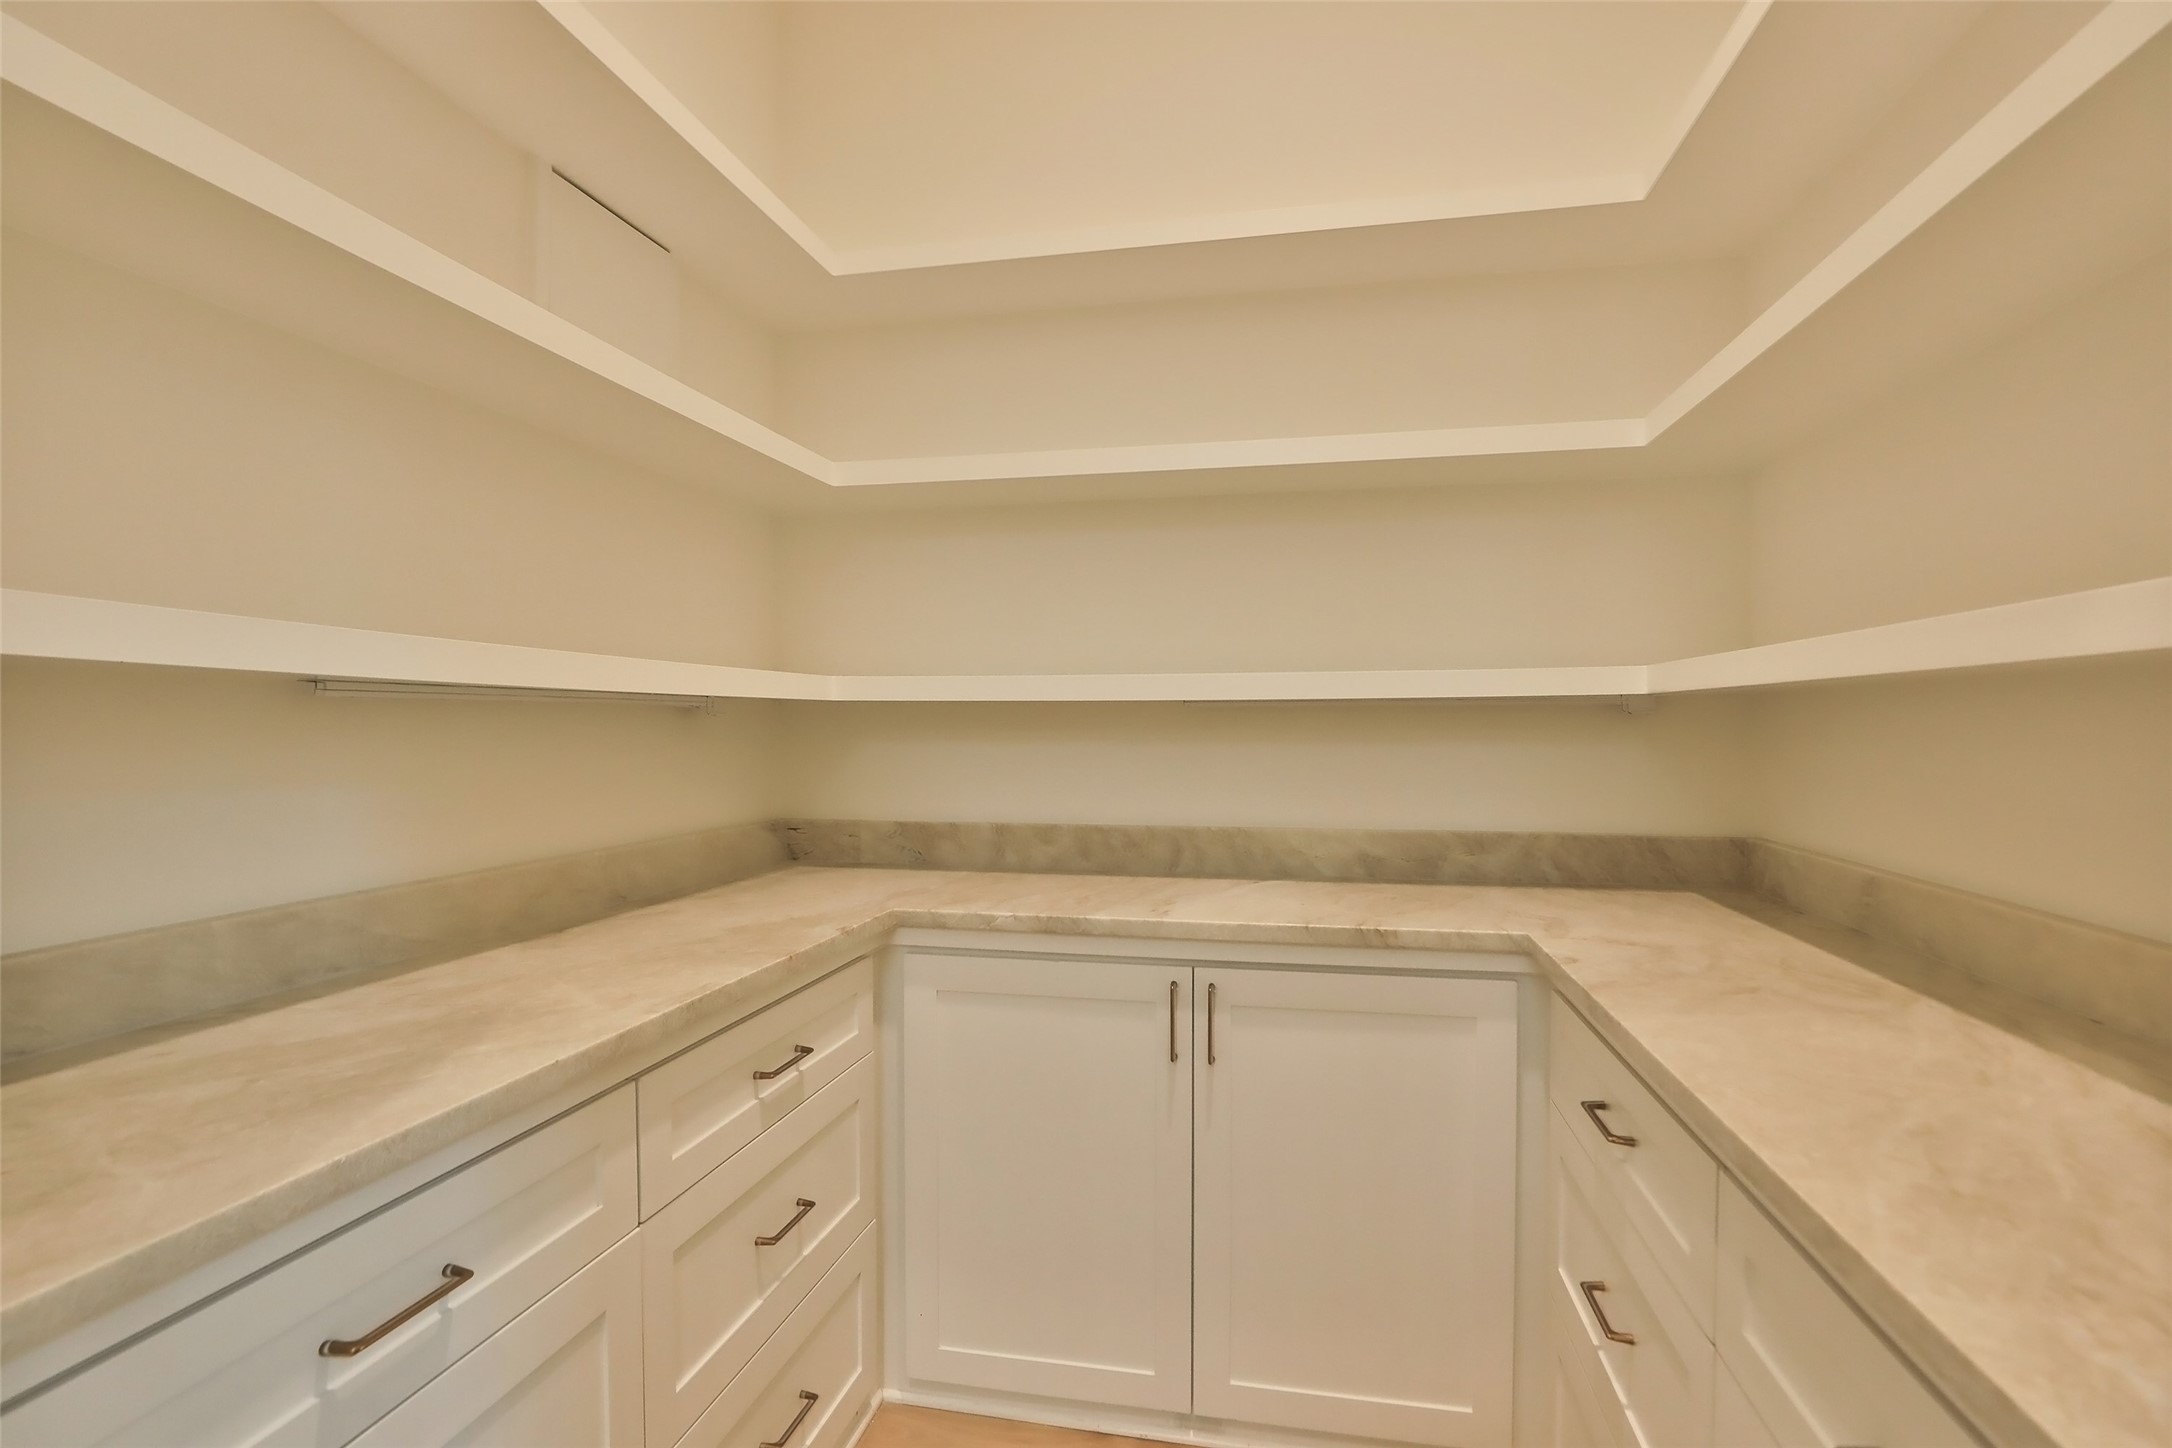 This is the pantry of your dreams measuring 7'4